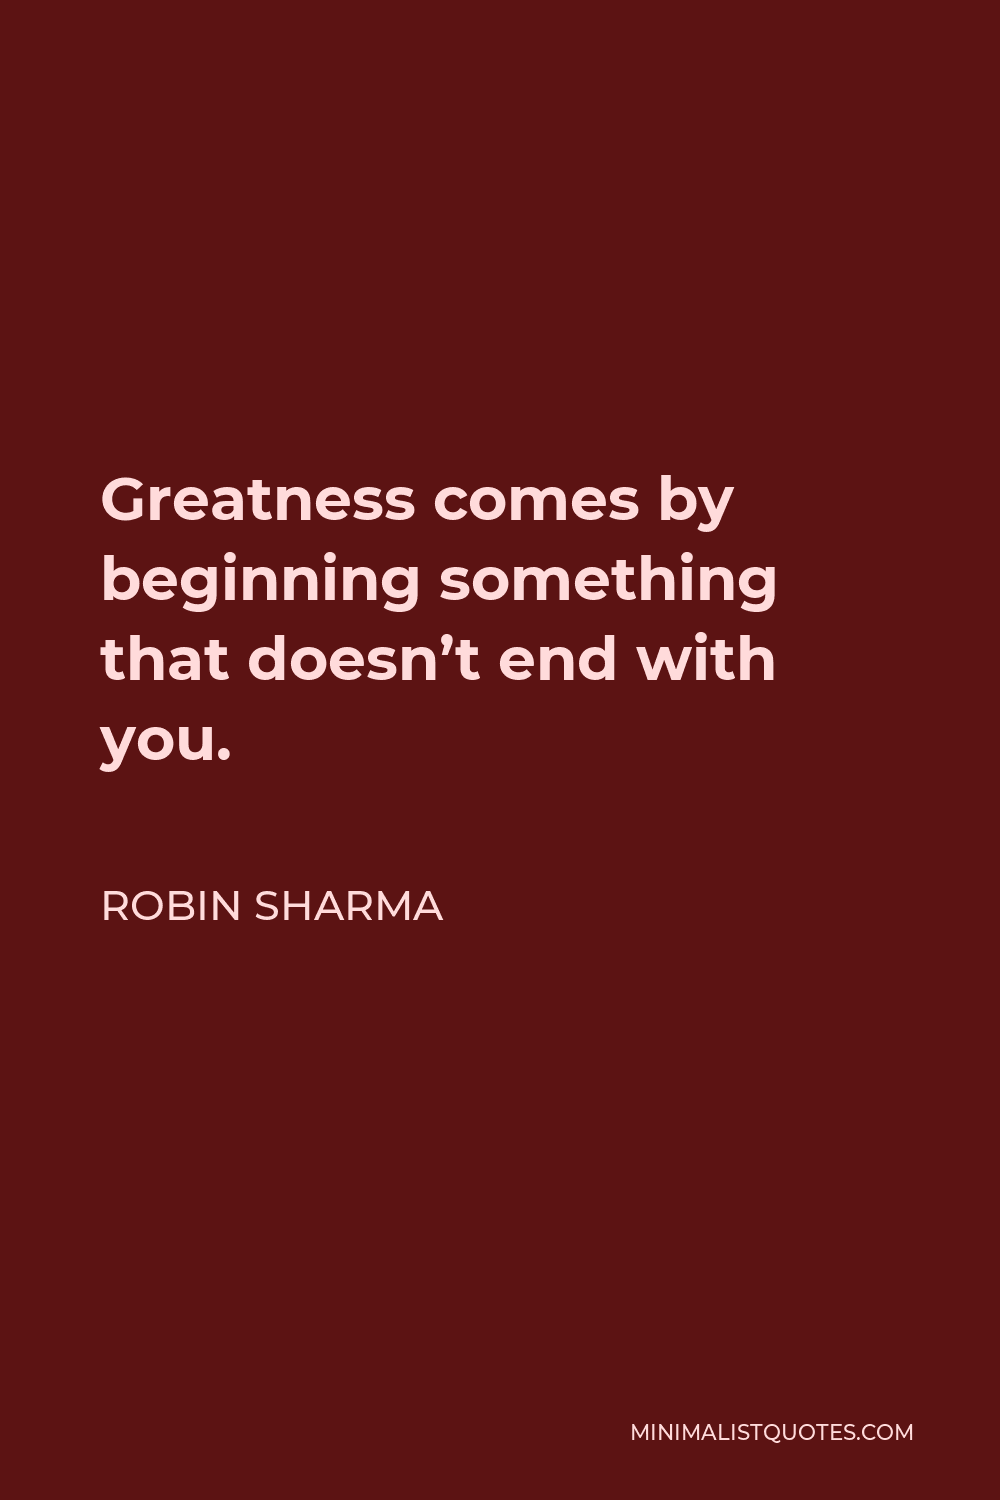 Robin Sharma Quote - Greatness comes by beginning something that doesn’t end with you.